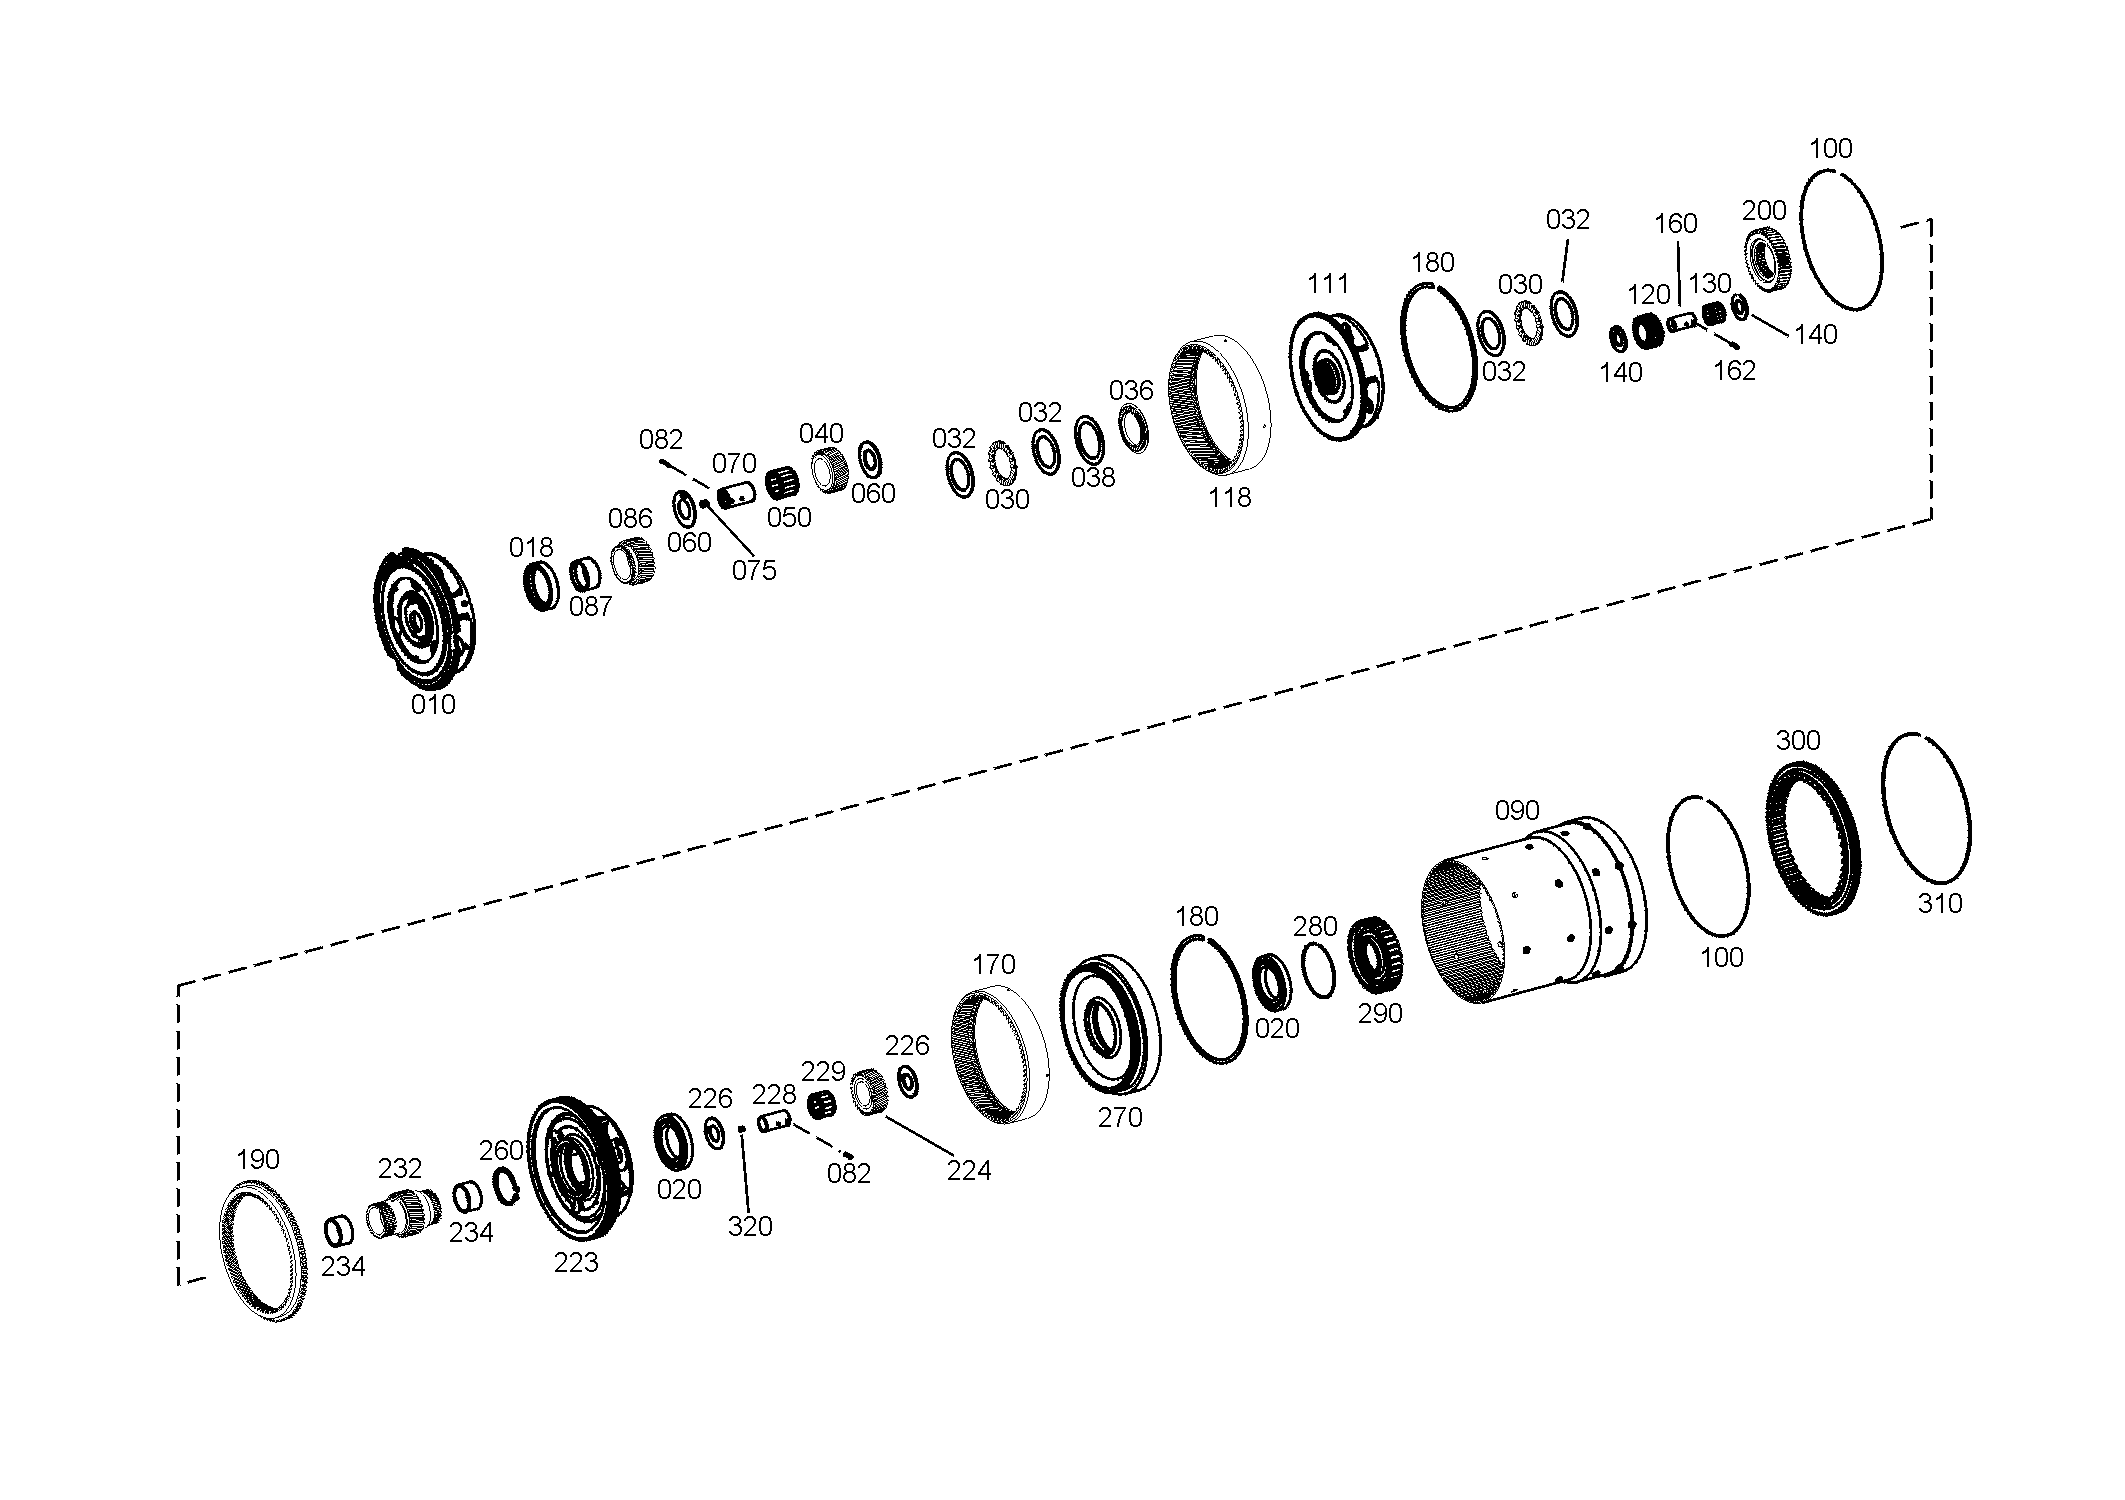 drawing for PPM 09397960 - BALL BEARING (figure 1)